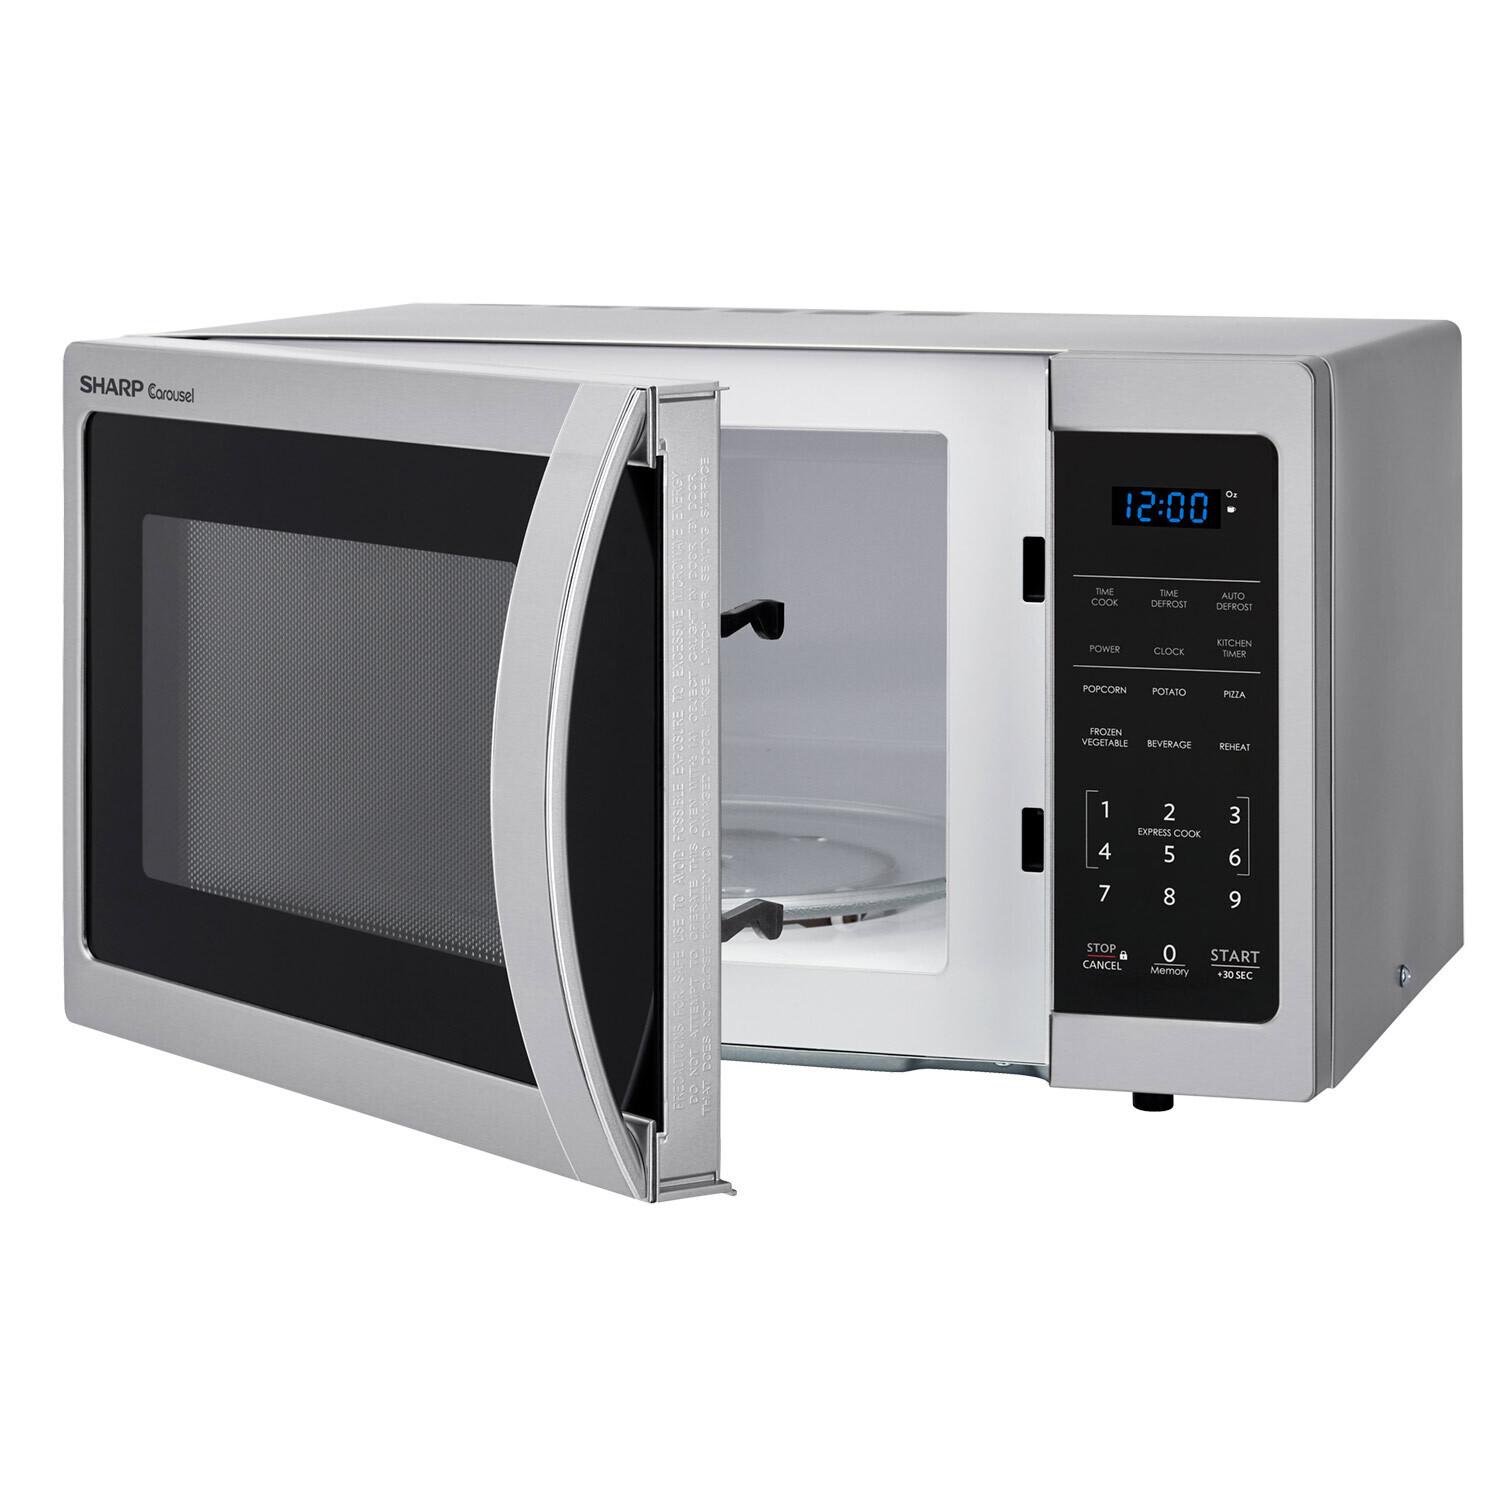 Sharp 0.9 cu. ft. 900w Sharp Stainless Steel Carousel Countertop Microwave Oven